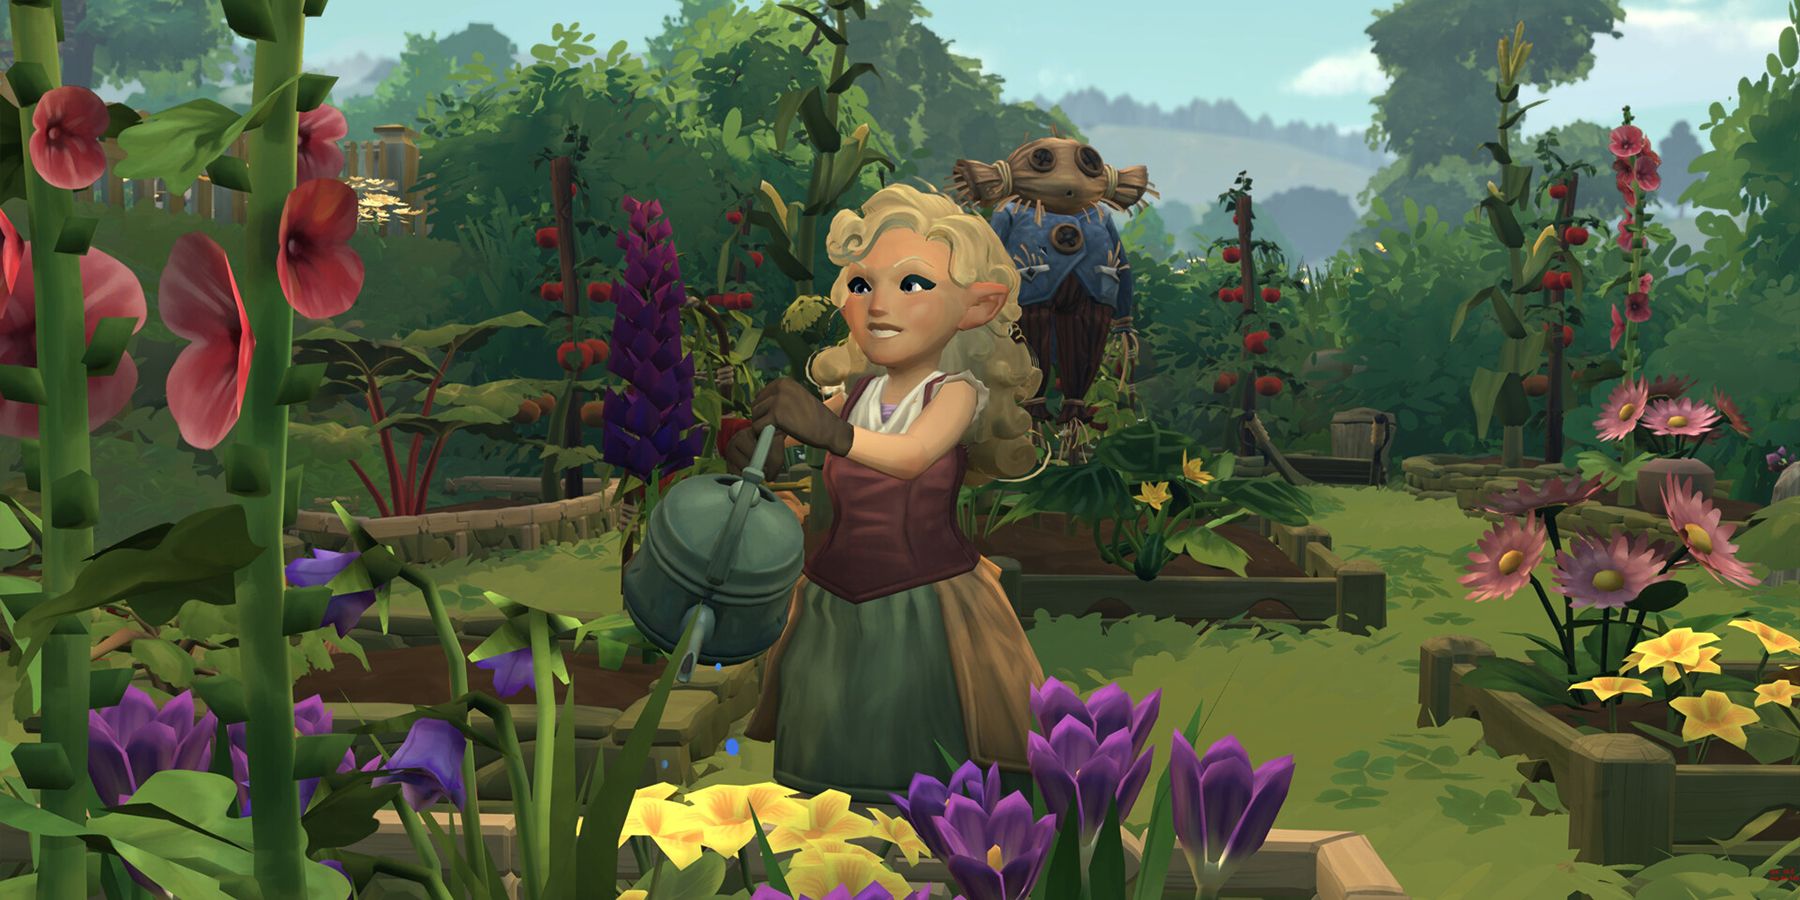 A Hobbit watering plants in Tales of the Shire